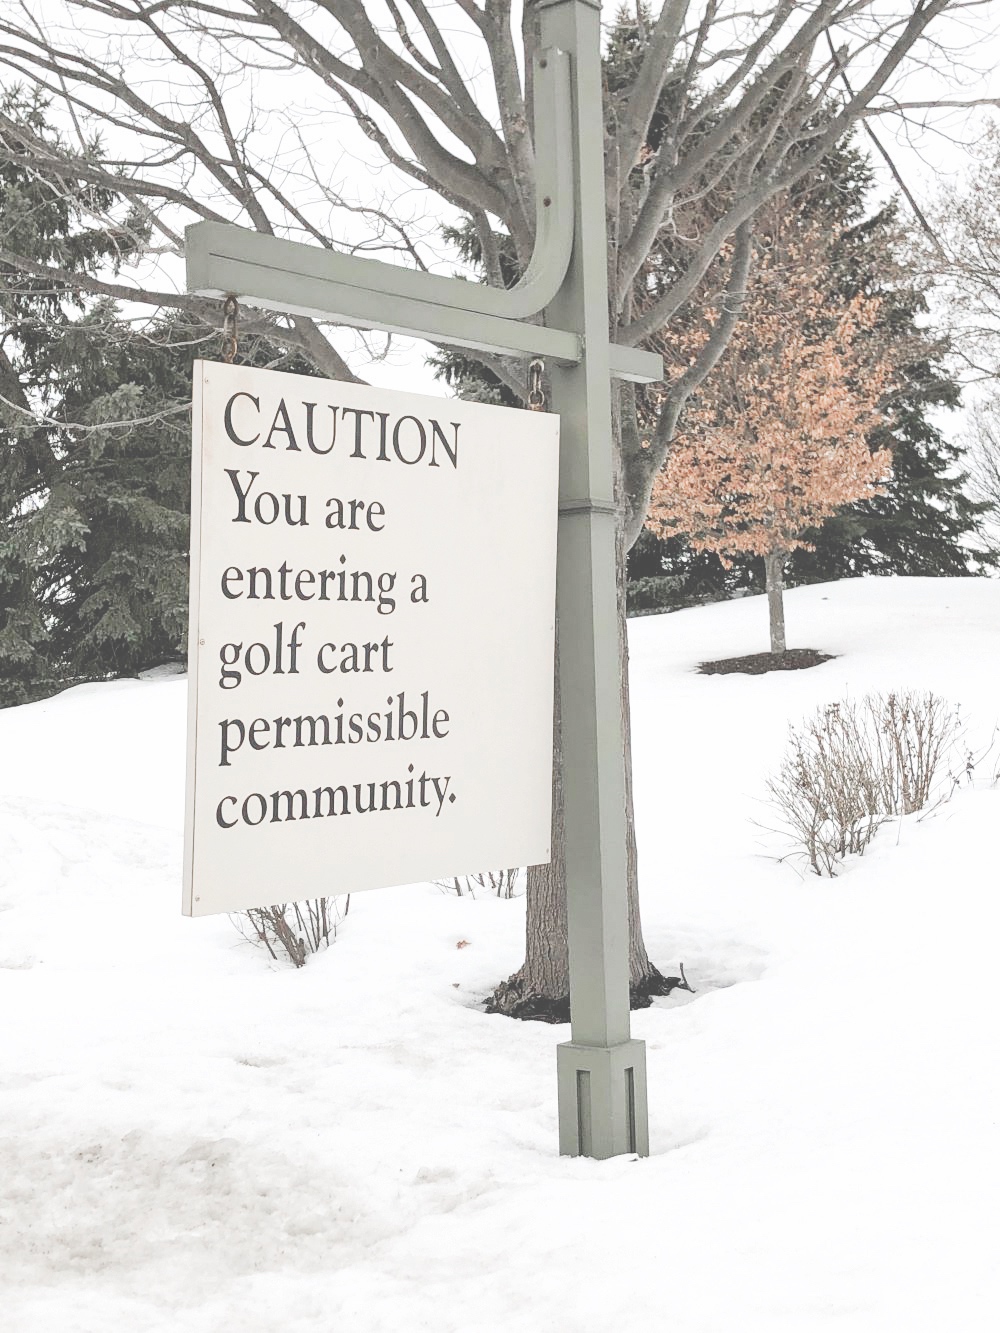 WBSC member Paxton Knopsnyder sees a need for signage around Sun City, like this golf cart notice, alerting drivers whom they share roads. (Photo provided)